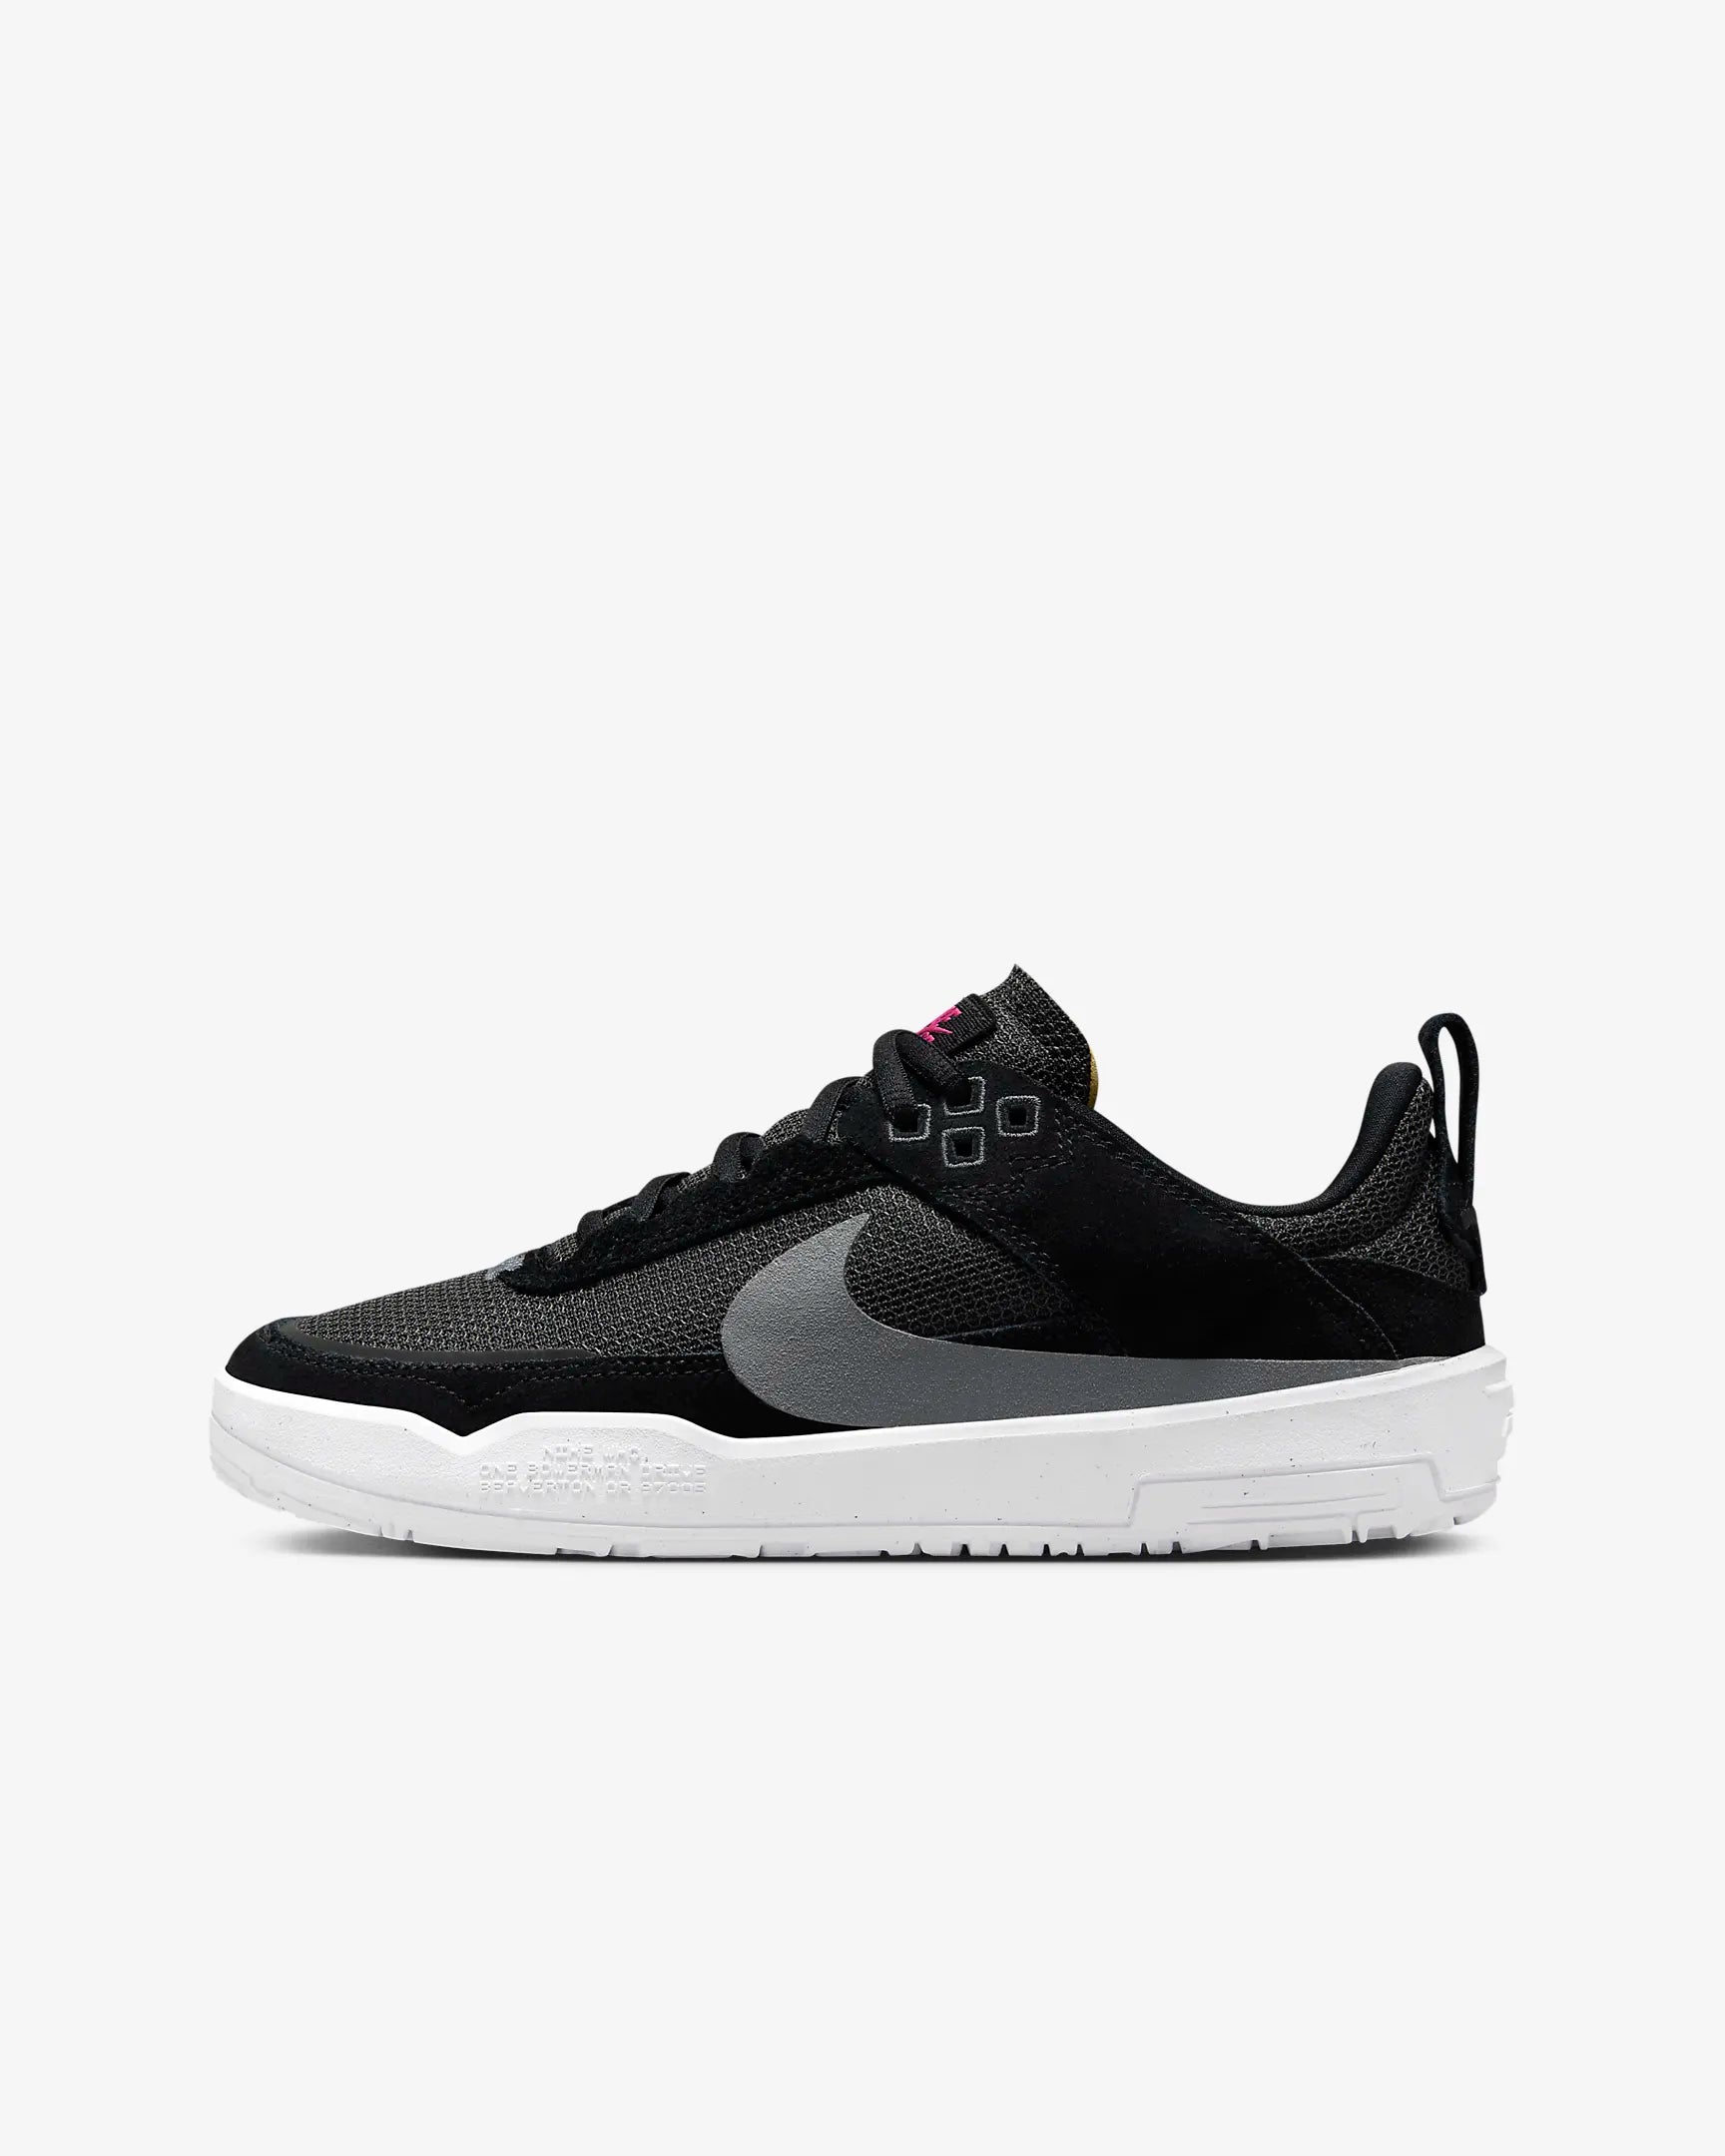 Nike SB Day One GS Shoes - (Black/Anthracite/Alchemy Pink/Cool Grey)